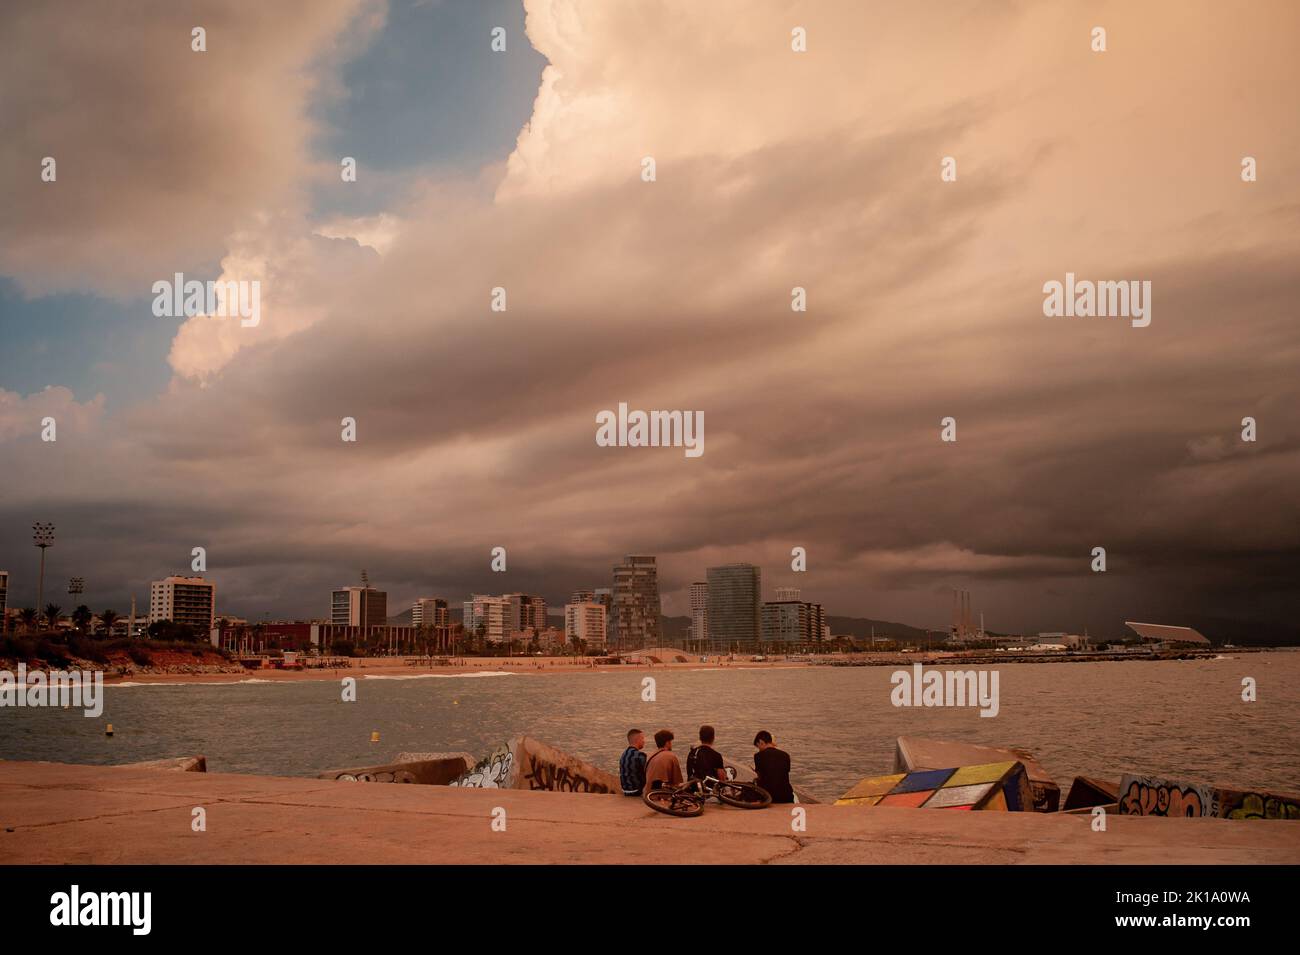 September 16, 2022, Barcelona, Spain: A group of kids spend the afternoon on a breakwater as stormy clouds roll across the sky in Barcelona, Spain. Credit: Jordi Boixareu/Alamy Live News Stock Photo